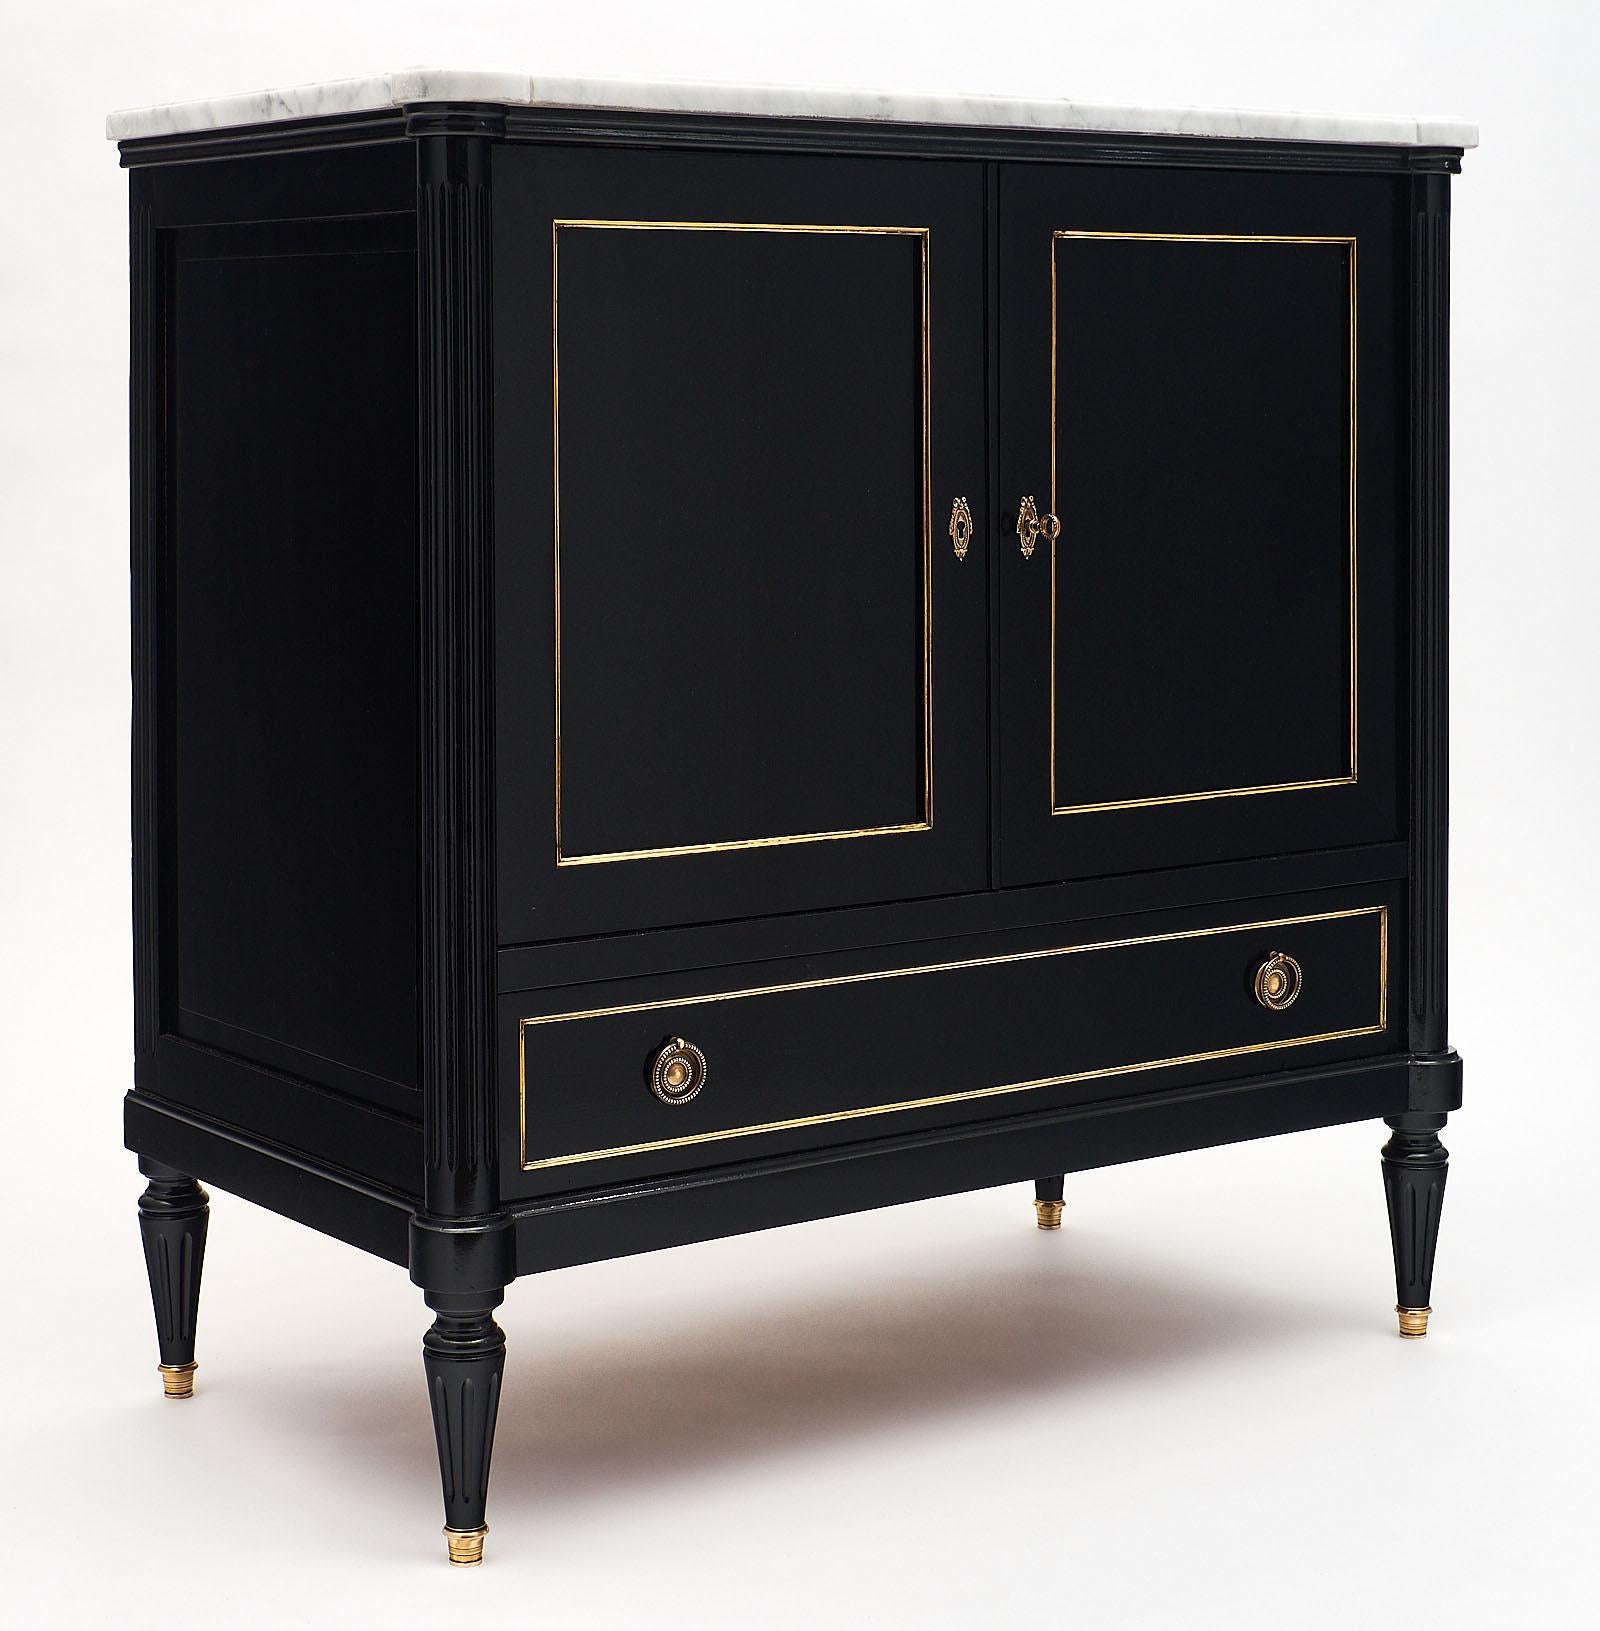 French Louis XVI style two-door buffet with a beautiful Carrara marble top. It is made of solid mahogany that has been ebonized and finished with a lustrous French polish. All of the brass trim and working hardware is original. We love the compact